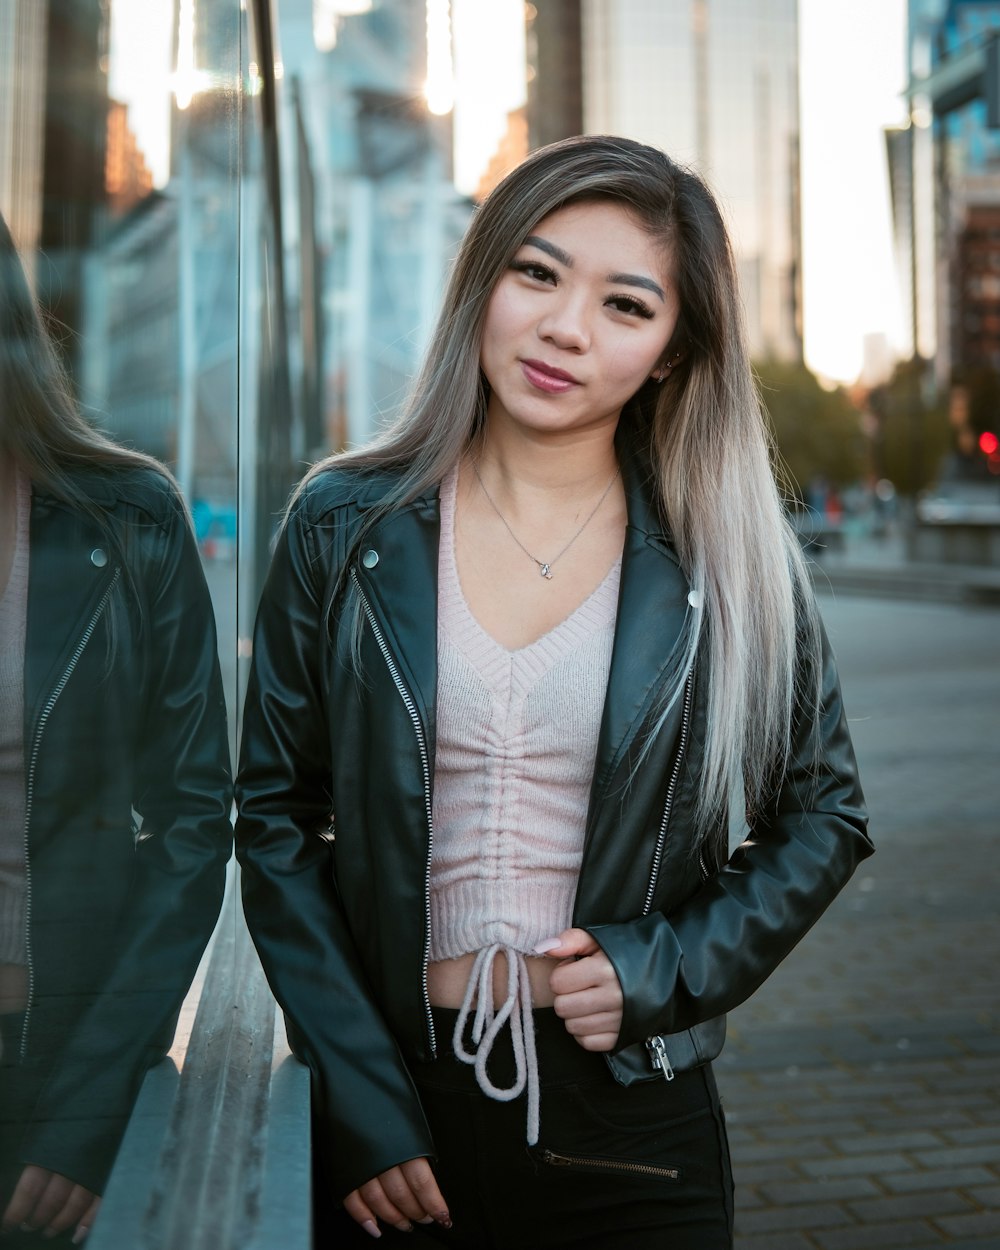 Woman in black leather jacket standing on sidewalk during daytime photo –  Free Vancouver Image on Unsplash